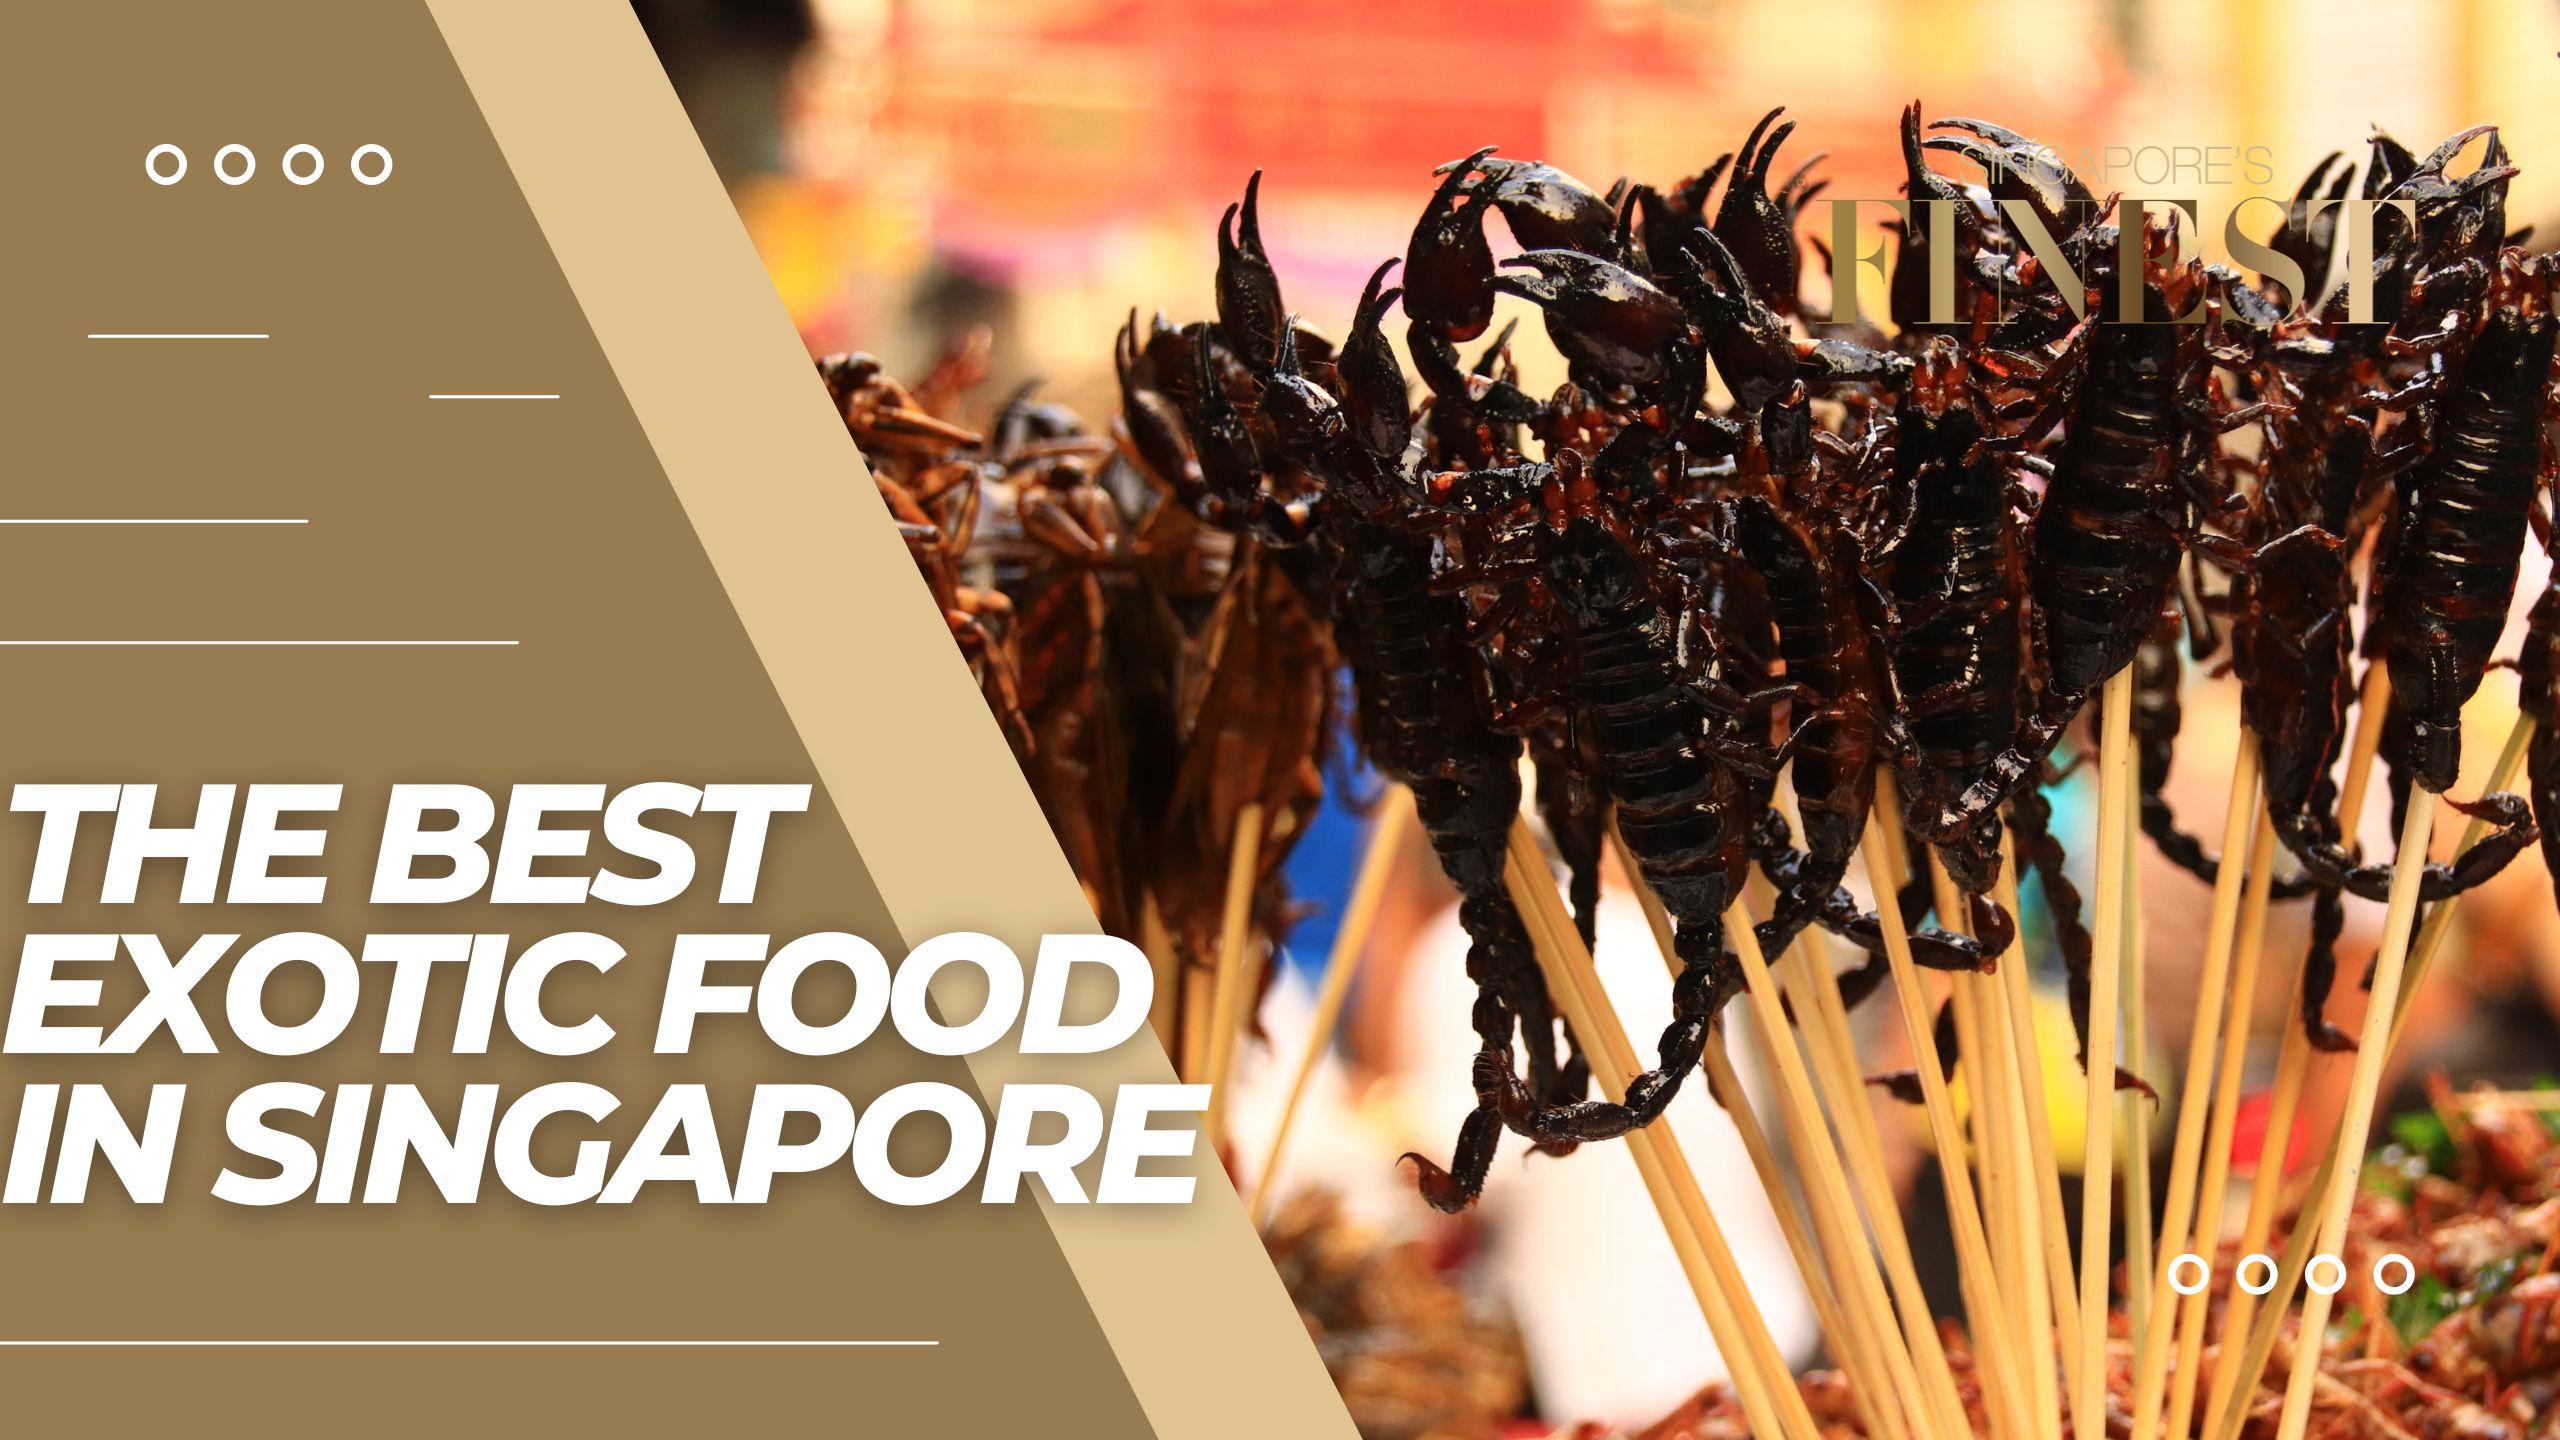 The Finest Exotic Food Restaurants in Singapore